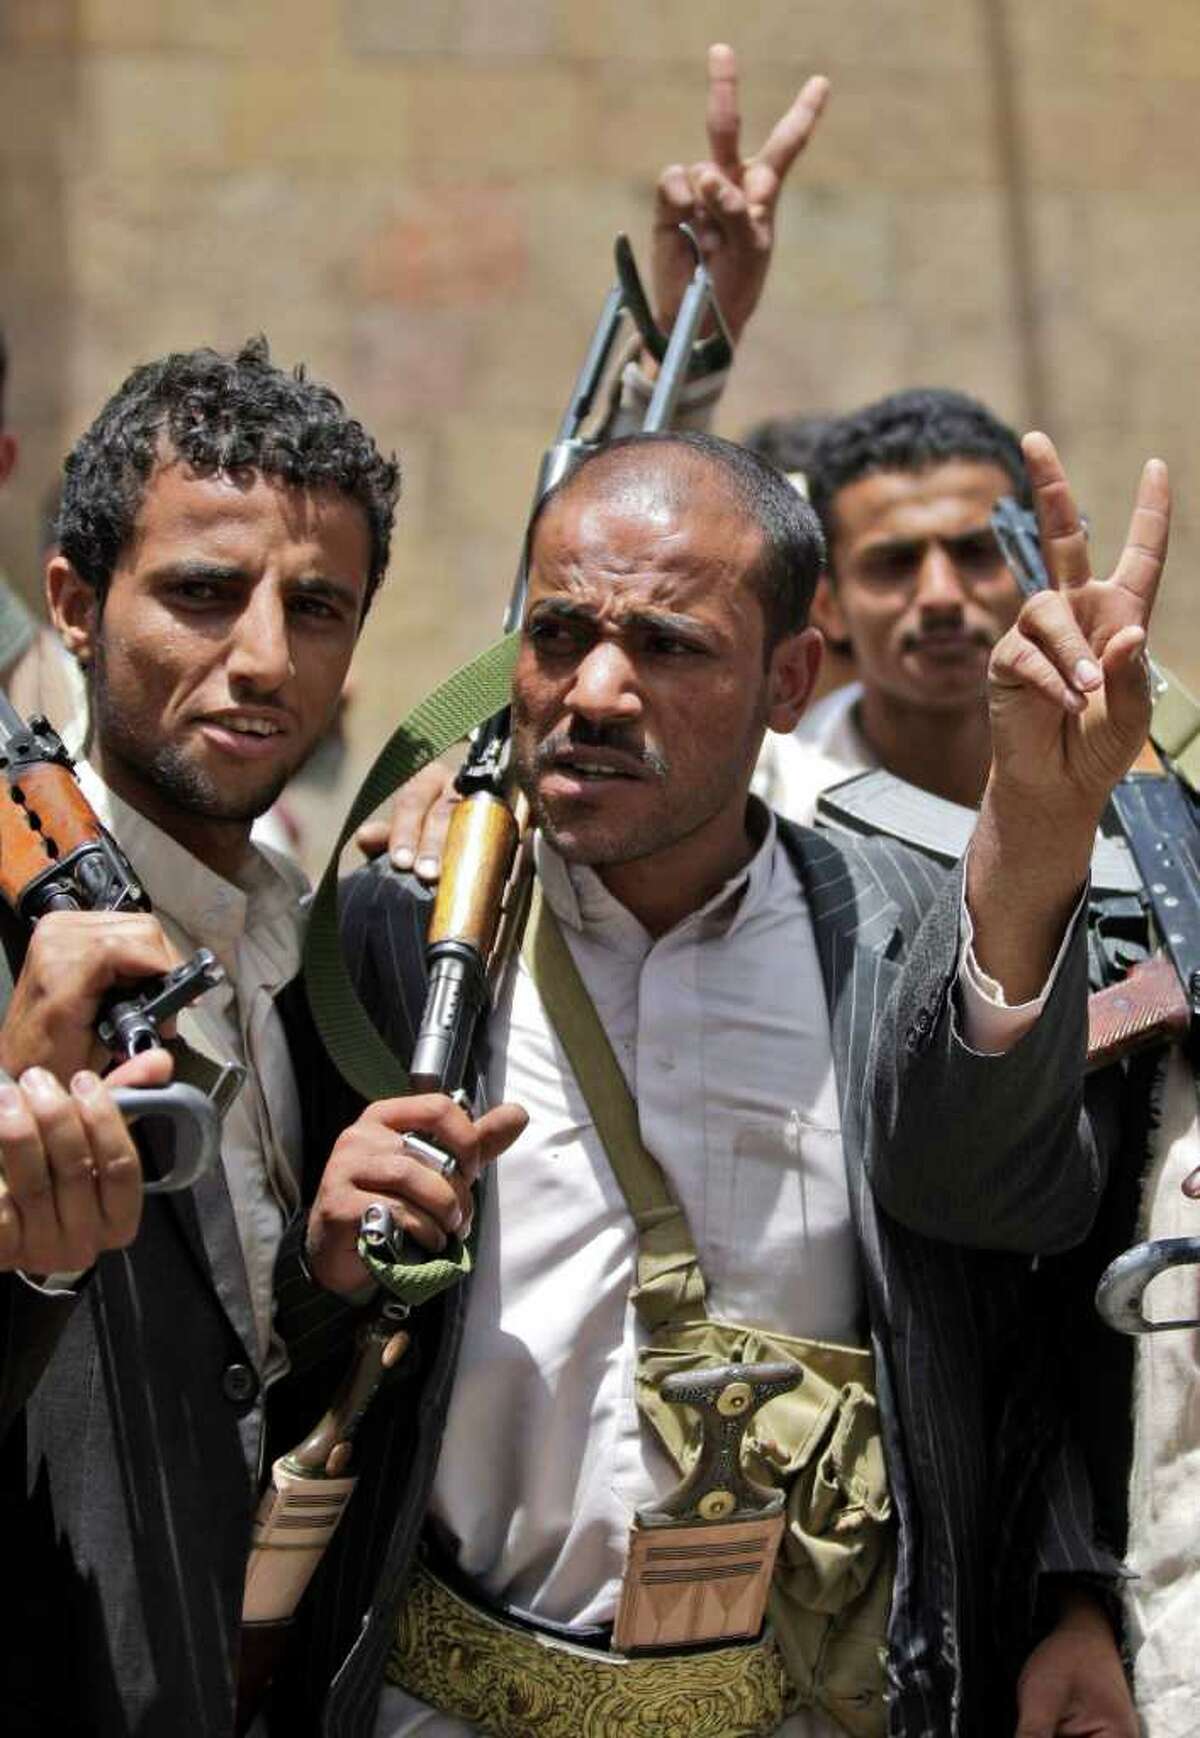 Armed Yemeni tribesmen, flash the victory sign while gathering outside the Ministry of Local Administration in Sanaa, Yemen, Sunday, May 29 ,2011. Yemen's embattled president and the country's most powerful tribal leader have agreed to end five days of gun battles that killed scores of people and pushed the country's political crisis closer to civil war. (AP Photo/Hani Mohammed)